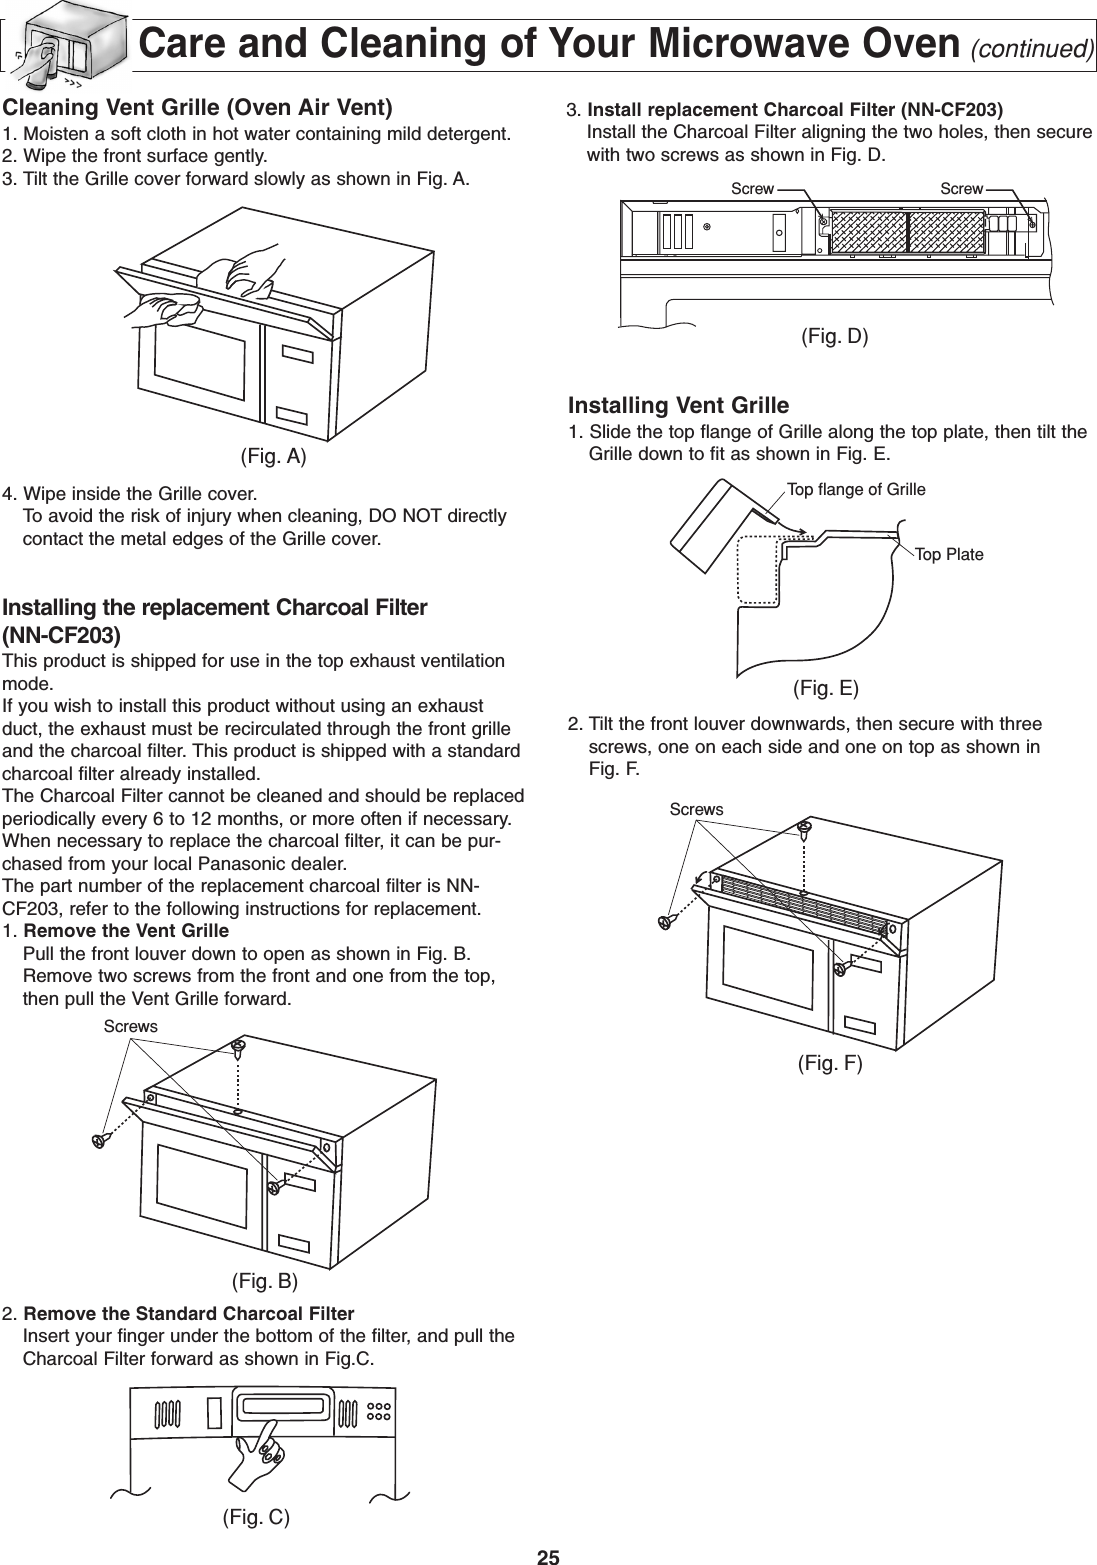 25Care and Cleaning of Your Microwave Oven(continued)Cleaning Vent Grille (Oven Air Vent)1. Moisten a soft cloth in hot water containing mild detergent.2. Wipe the front surface gently.3. Tilt the Grille cover forward slowly as shown in Fig. A.4. Wipe inside the Grille cover.To avoid the risk of injury when cleaning, DO NOT directlycontact the metal edges of the Grille cover.Installing the replacement Charcoal Filter(NN-CF203)This product is shipped for use in the top exhaust ventilationmode.If you wish to install this product without using an exhaustduct, the exhaust must be recirculated through the front grilleand the charcoal filter. This product is shipped with a standardcharcoal filter already installed.The Charcoal Filter cannot be cleaned and should be replacedperiodically every 6 to 12 months, or more often if necessary.When necessary to replace the charcoal filter, it can be pur-chased from your local Panasonic dealer.The part number of the replacement charcoal filter is NN-CF203, refer to the following instructions for replacement.1. Remove the Vent GrillePull the front louver down to open as shown in Fig. B.Remove two screws from the front and one from the top,then pull the Vent Grille forward. 2. Remove the Standard Charcoal FilterInsert your finger under the bottom of the filter, and pull theCharcoal Filter forward as shown in Fig.C.Installing Vent Grille1. Slide the top flange of Grille along the top plate, then tilt theGrille down to fit as shown in Fig. E.2. Tilt the front louver downwards, then secure with threescrews, one on each side and one on top as shown inFig. F.(Fig. A)Screws(Fig. B)(Fig. D)Screw ScrewTop flange of GrilleTop Plate(Fig. E)Screws(Fig. F)(Fig. C)3. Install replacement Charcoal Filter (NN-CF203)Install the Charcoal Filter aligning the two holes, then securewith two screws as shown in Fig. D.